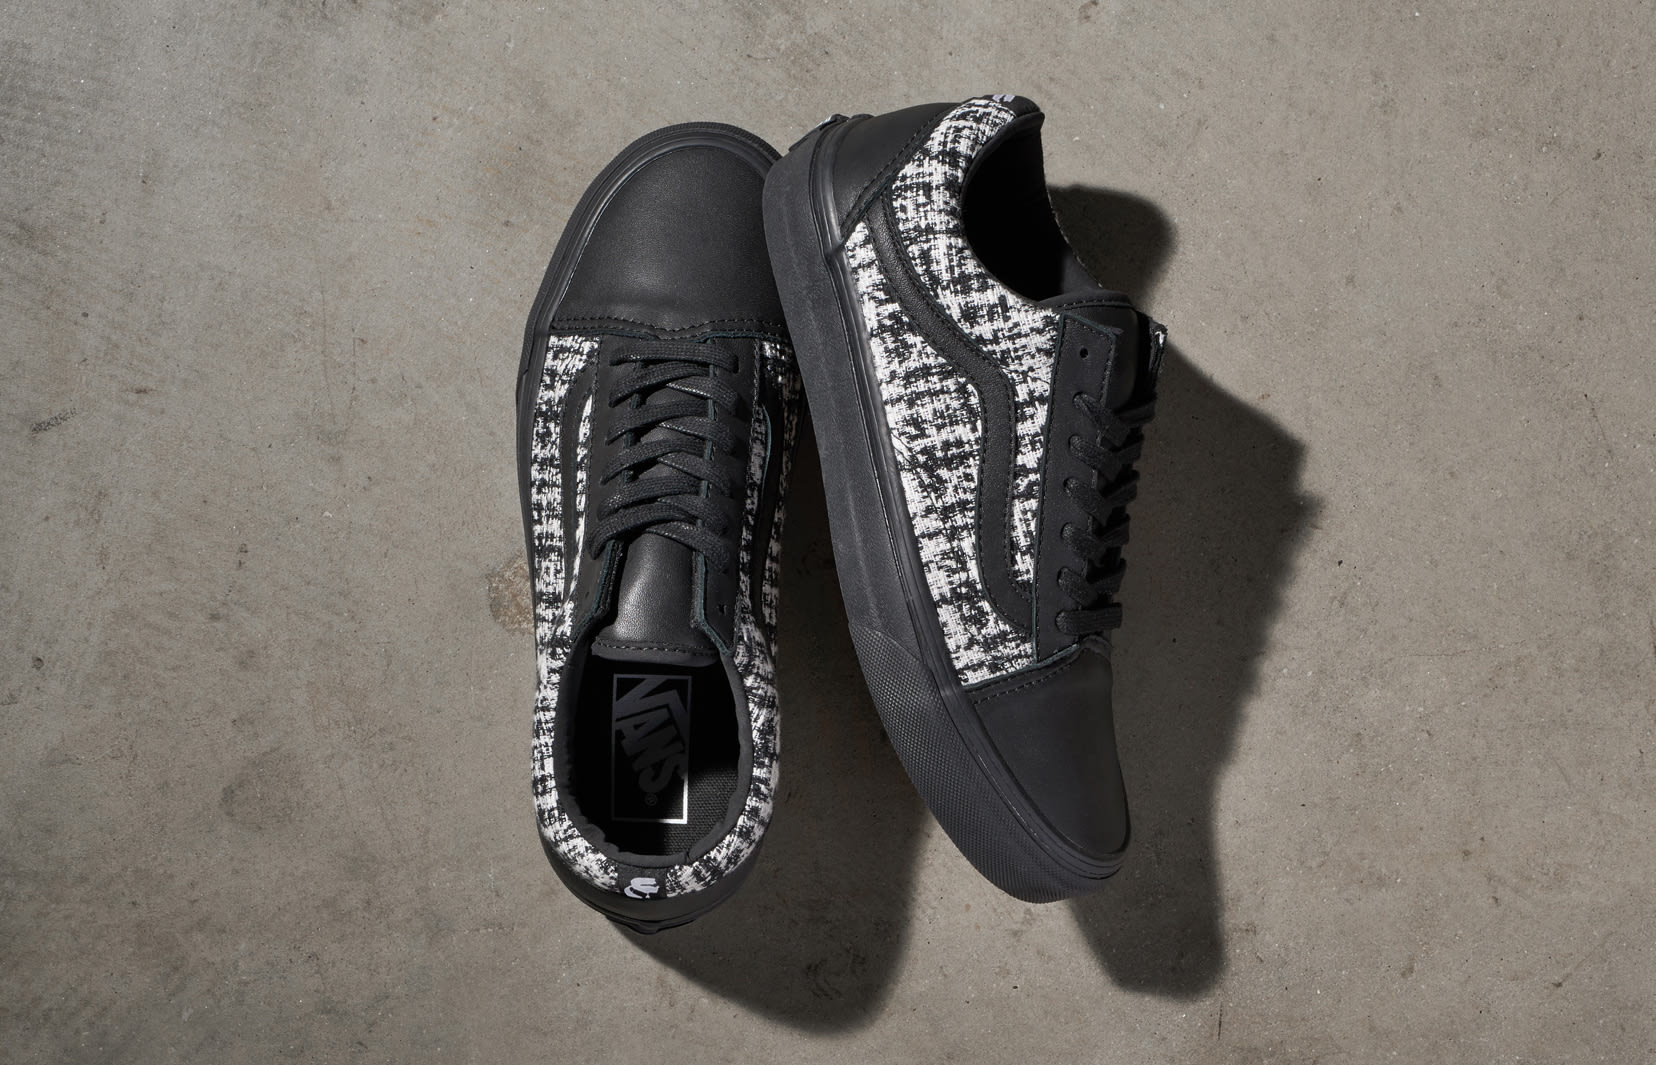 jacht grind Berg Karl Lagerfeld Puts His Face on Vans Collaboration | Complex